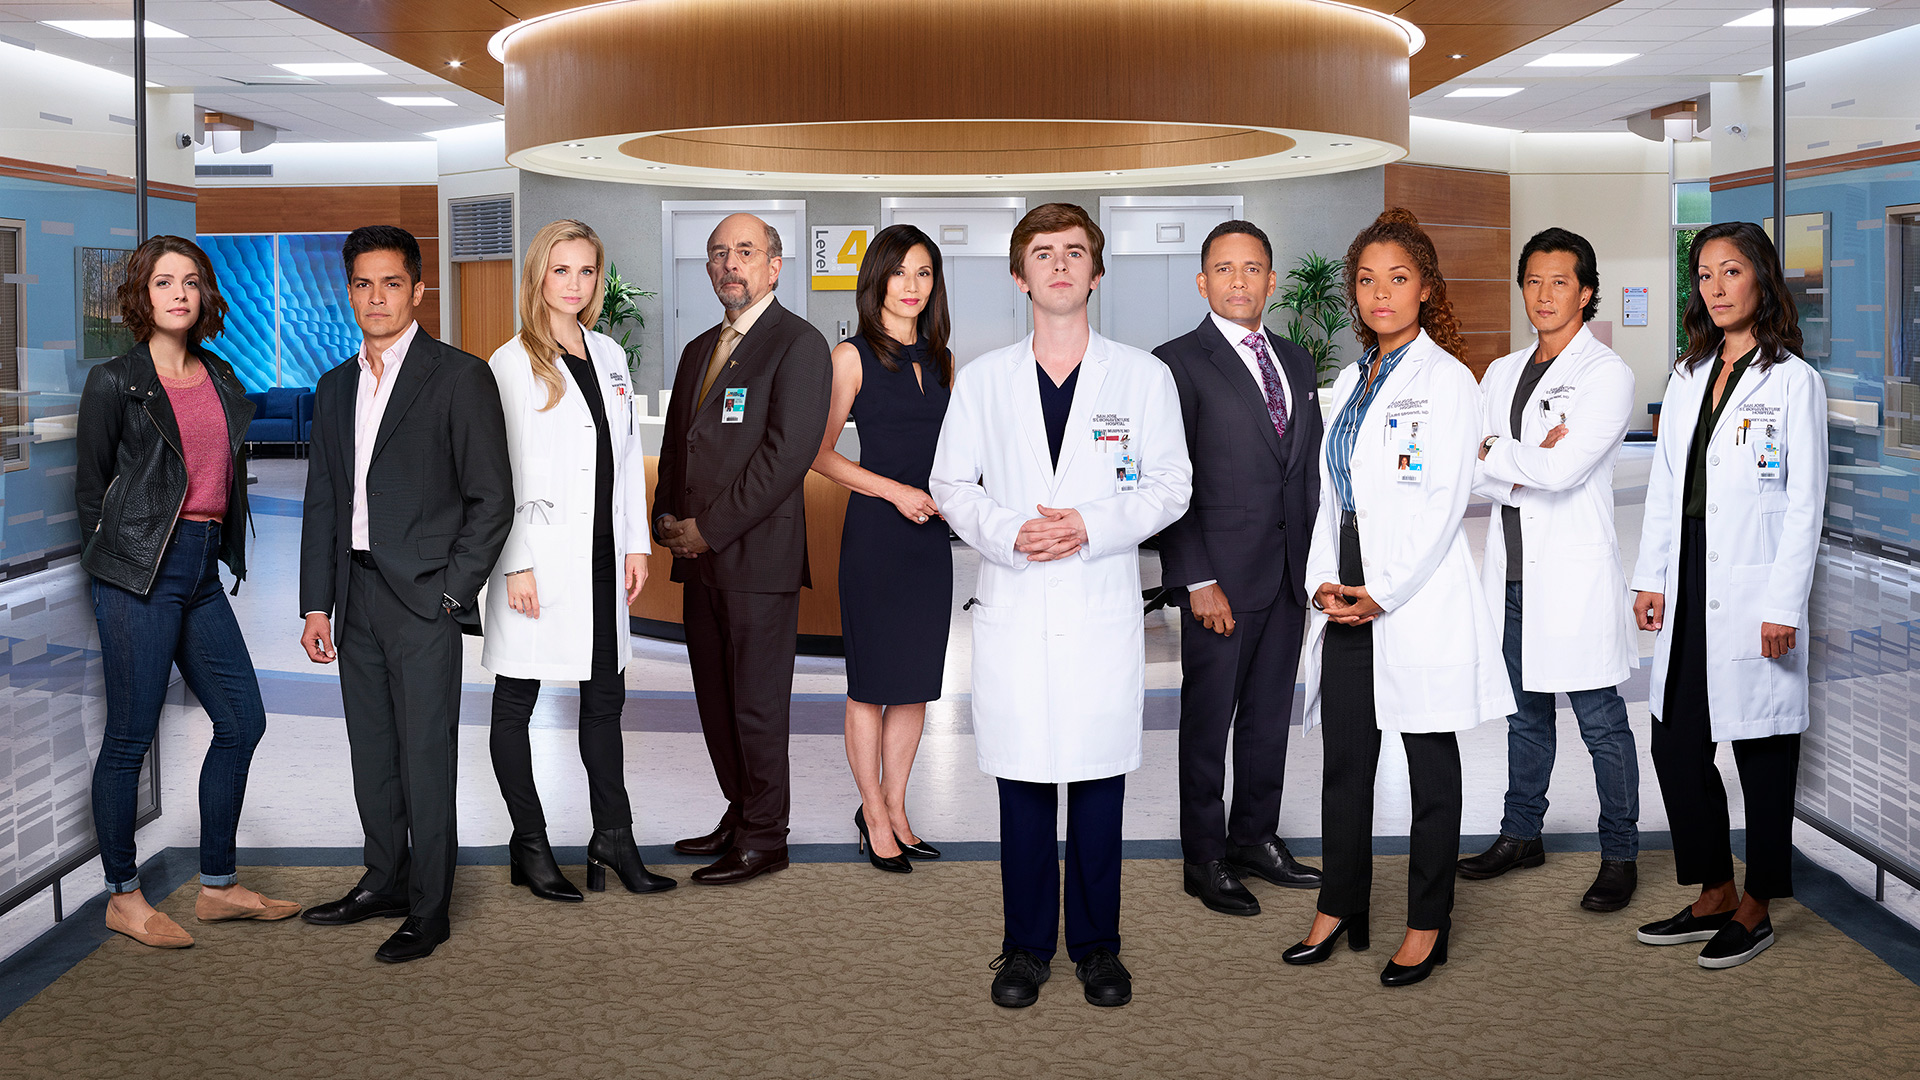 WATCH The Good Doctor Season 5 Episode 4 - (5x4) Full Episodes HD.